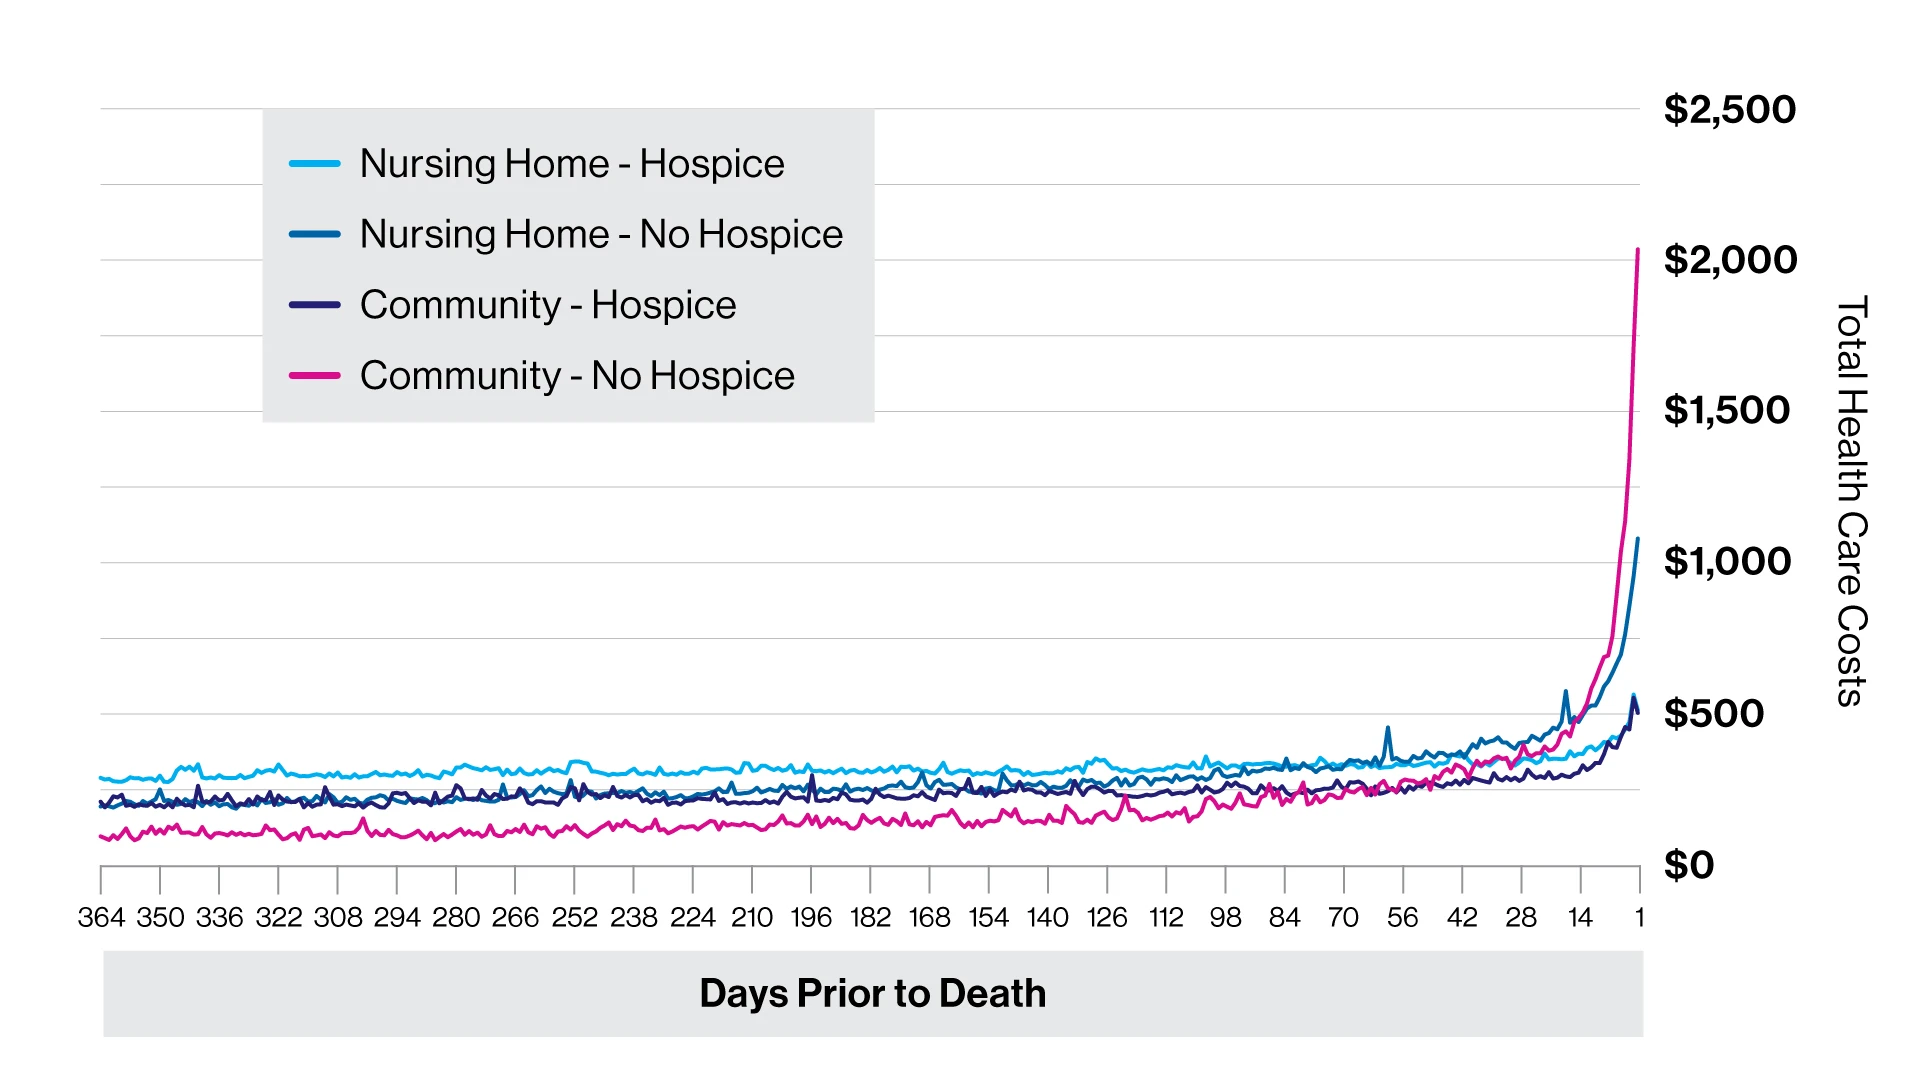 Daily unadjusted total health care costs in the last year of life for people with dementia in community and nursing home settings in the United States, by hospice use, 2002–19.